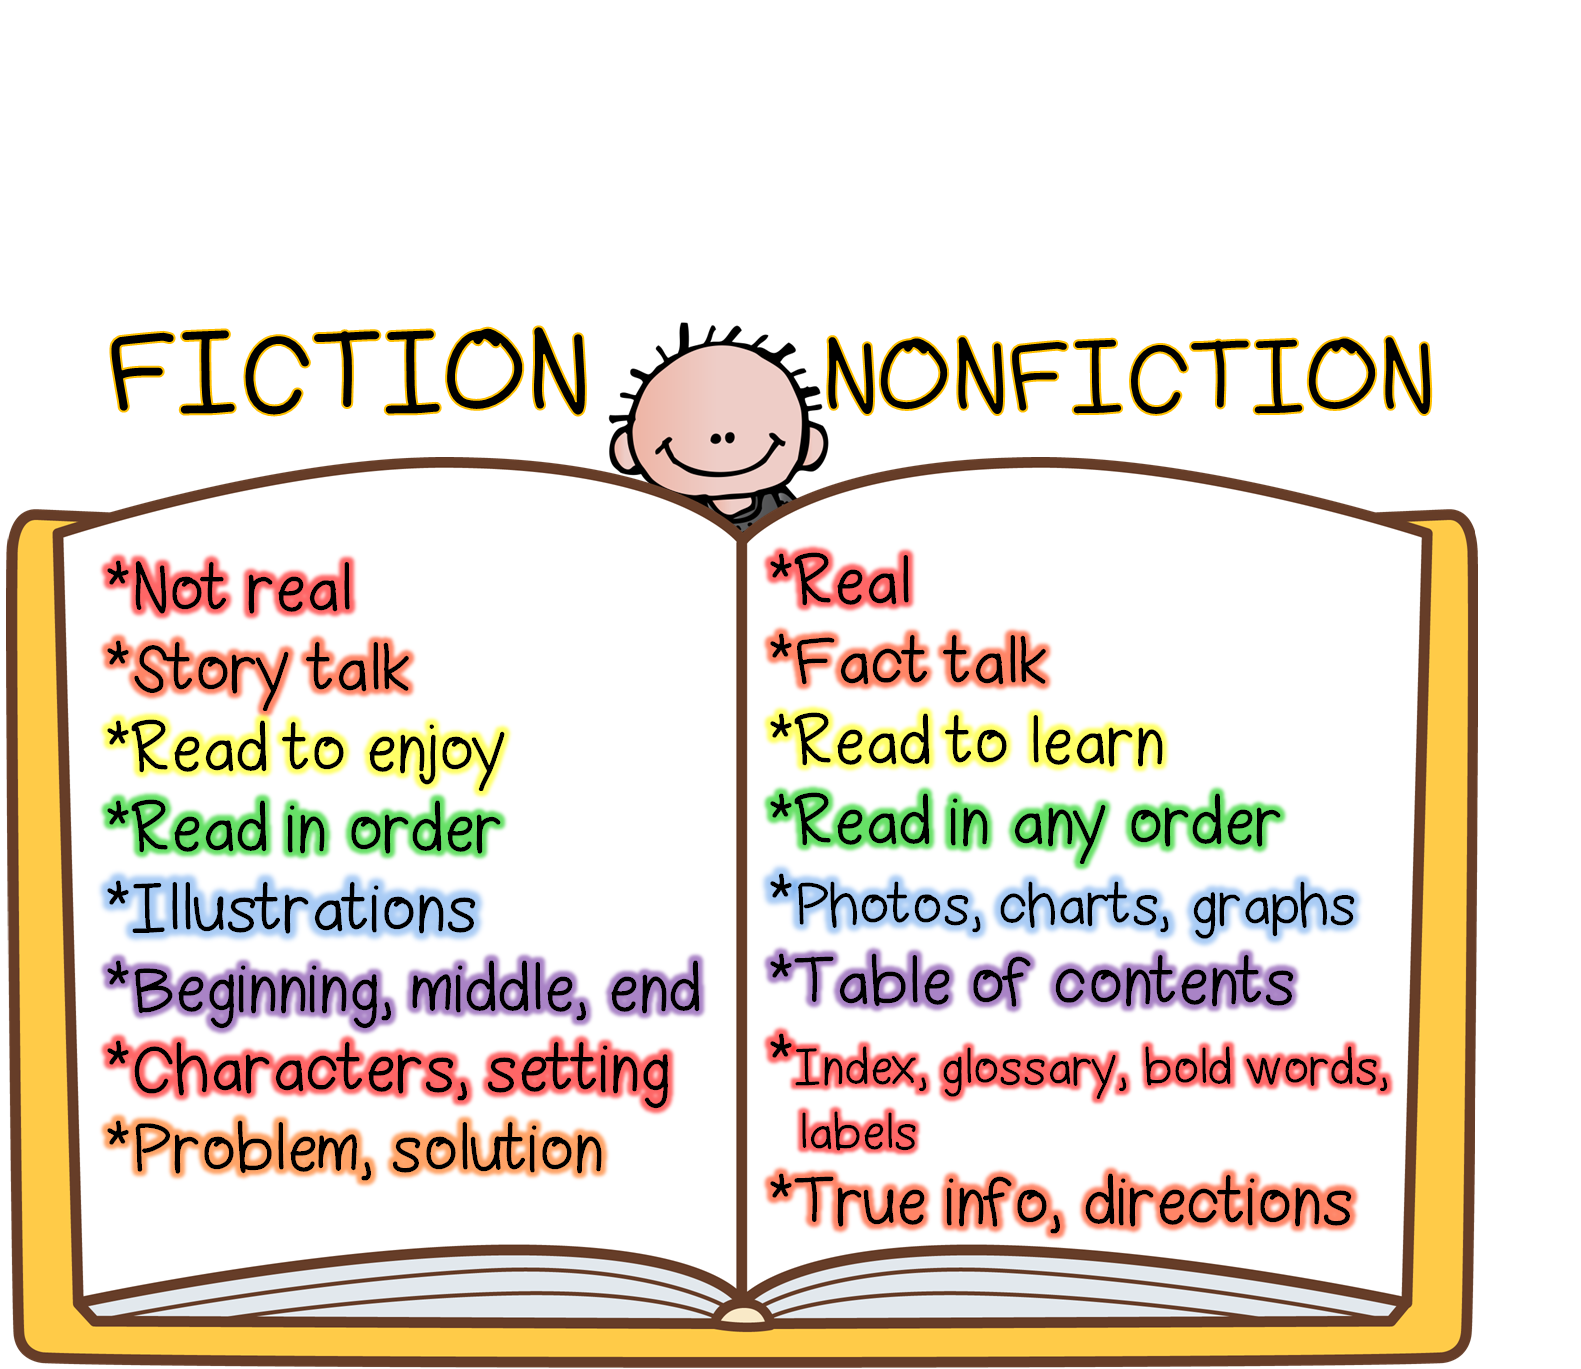 L like reading read. Fiction and non Fiction books. Fiction non Fiction разница. Types of Fiction. Types of books English.